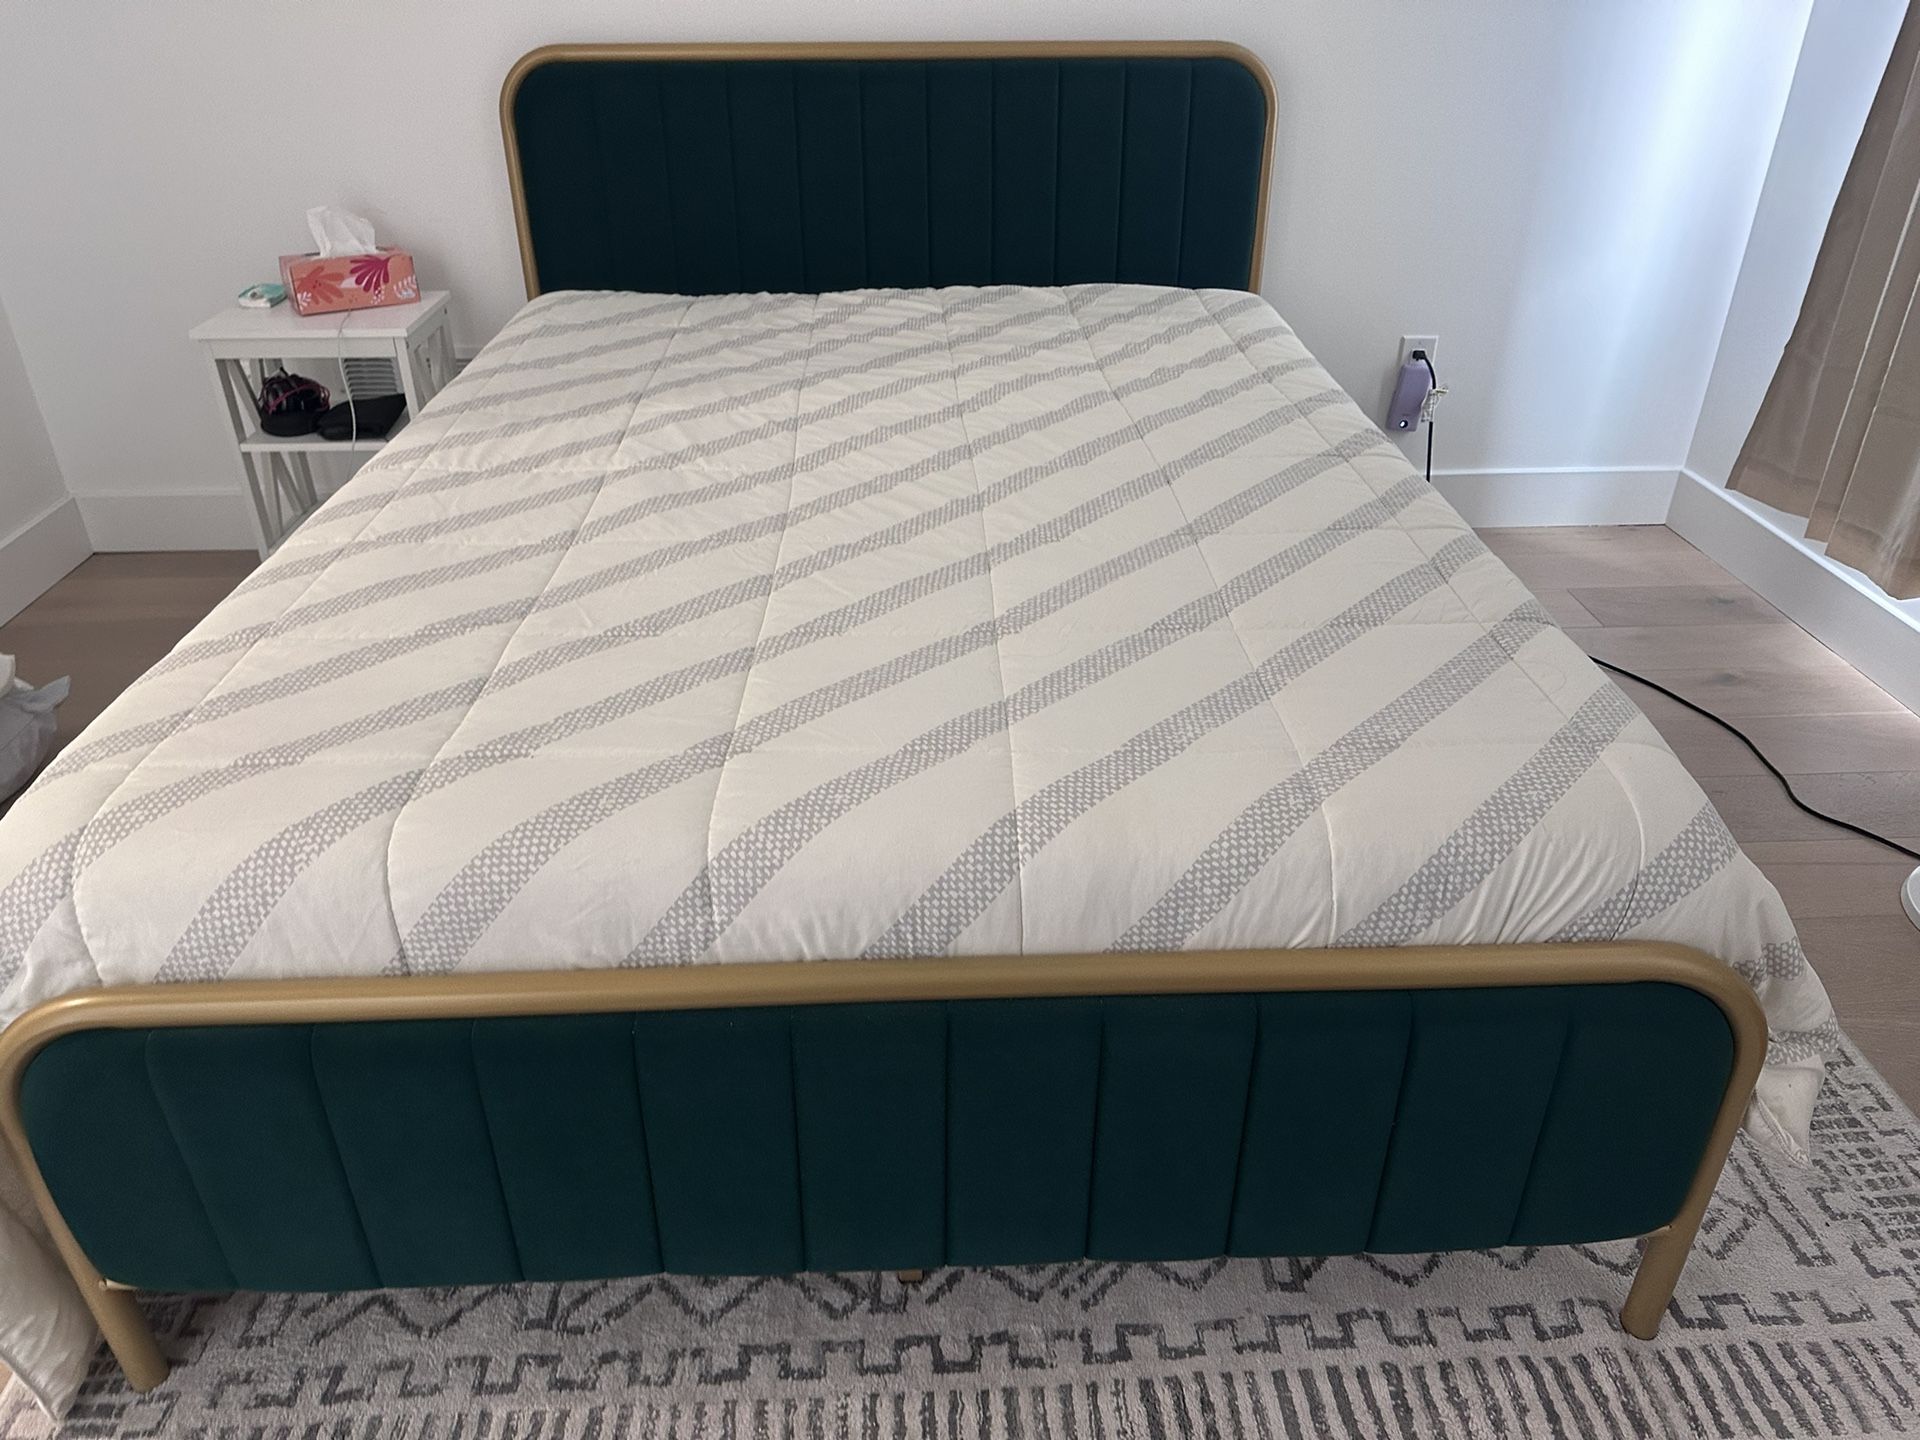 Bed Frame - Queen size